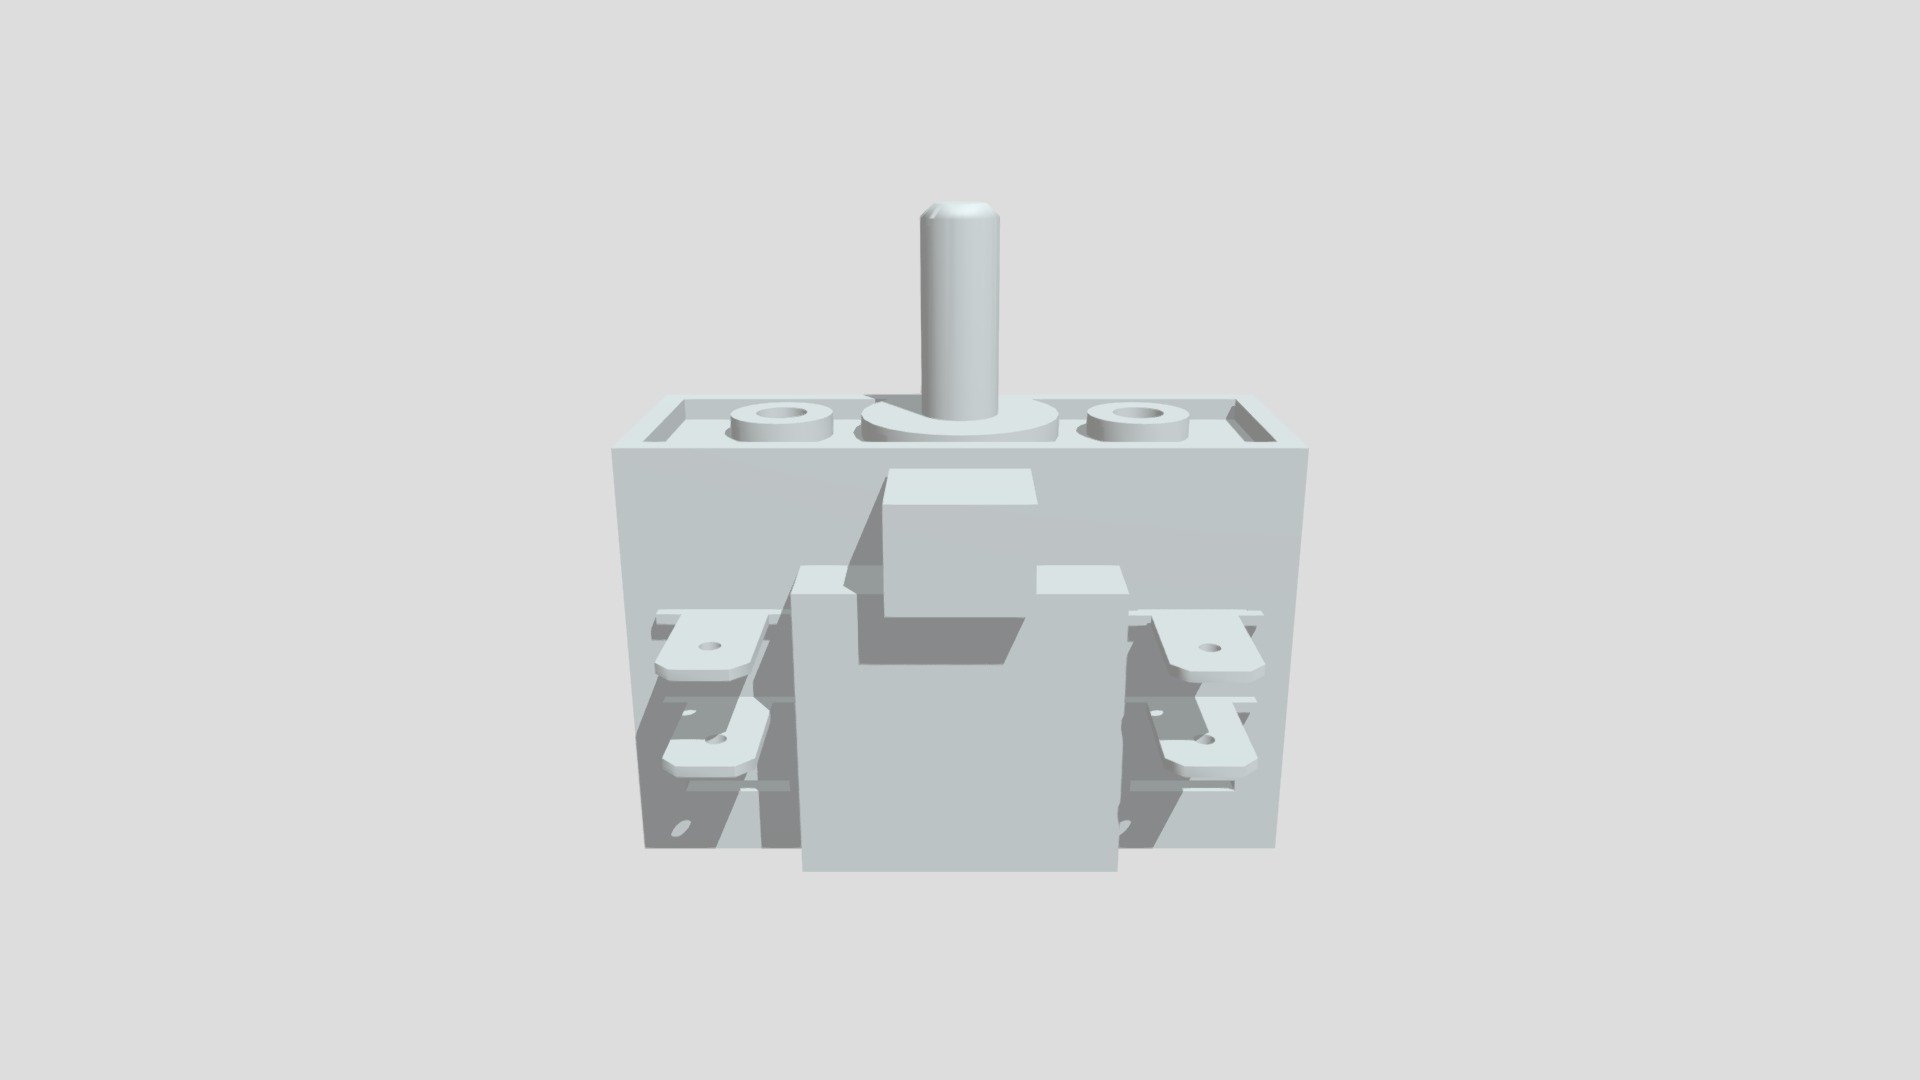 Rotary switch (three-position) - Download Free 3D model by 3dltru (@3dltru)  [b4896e6]